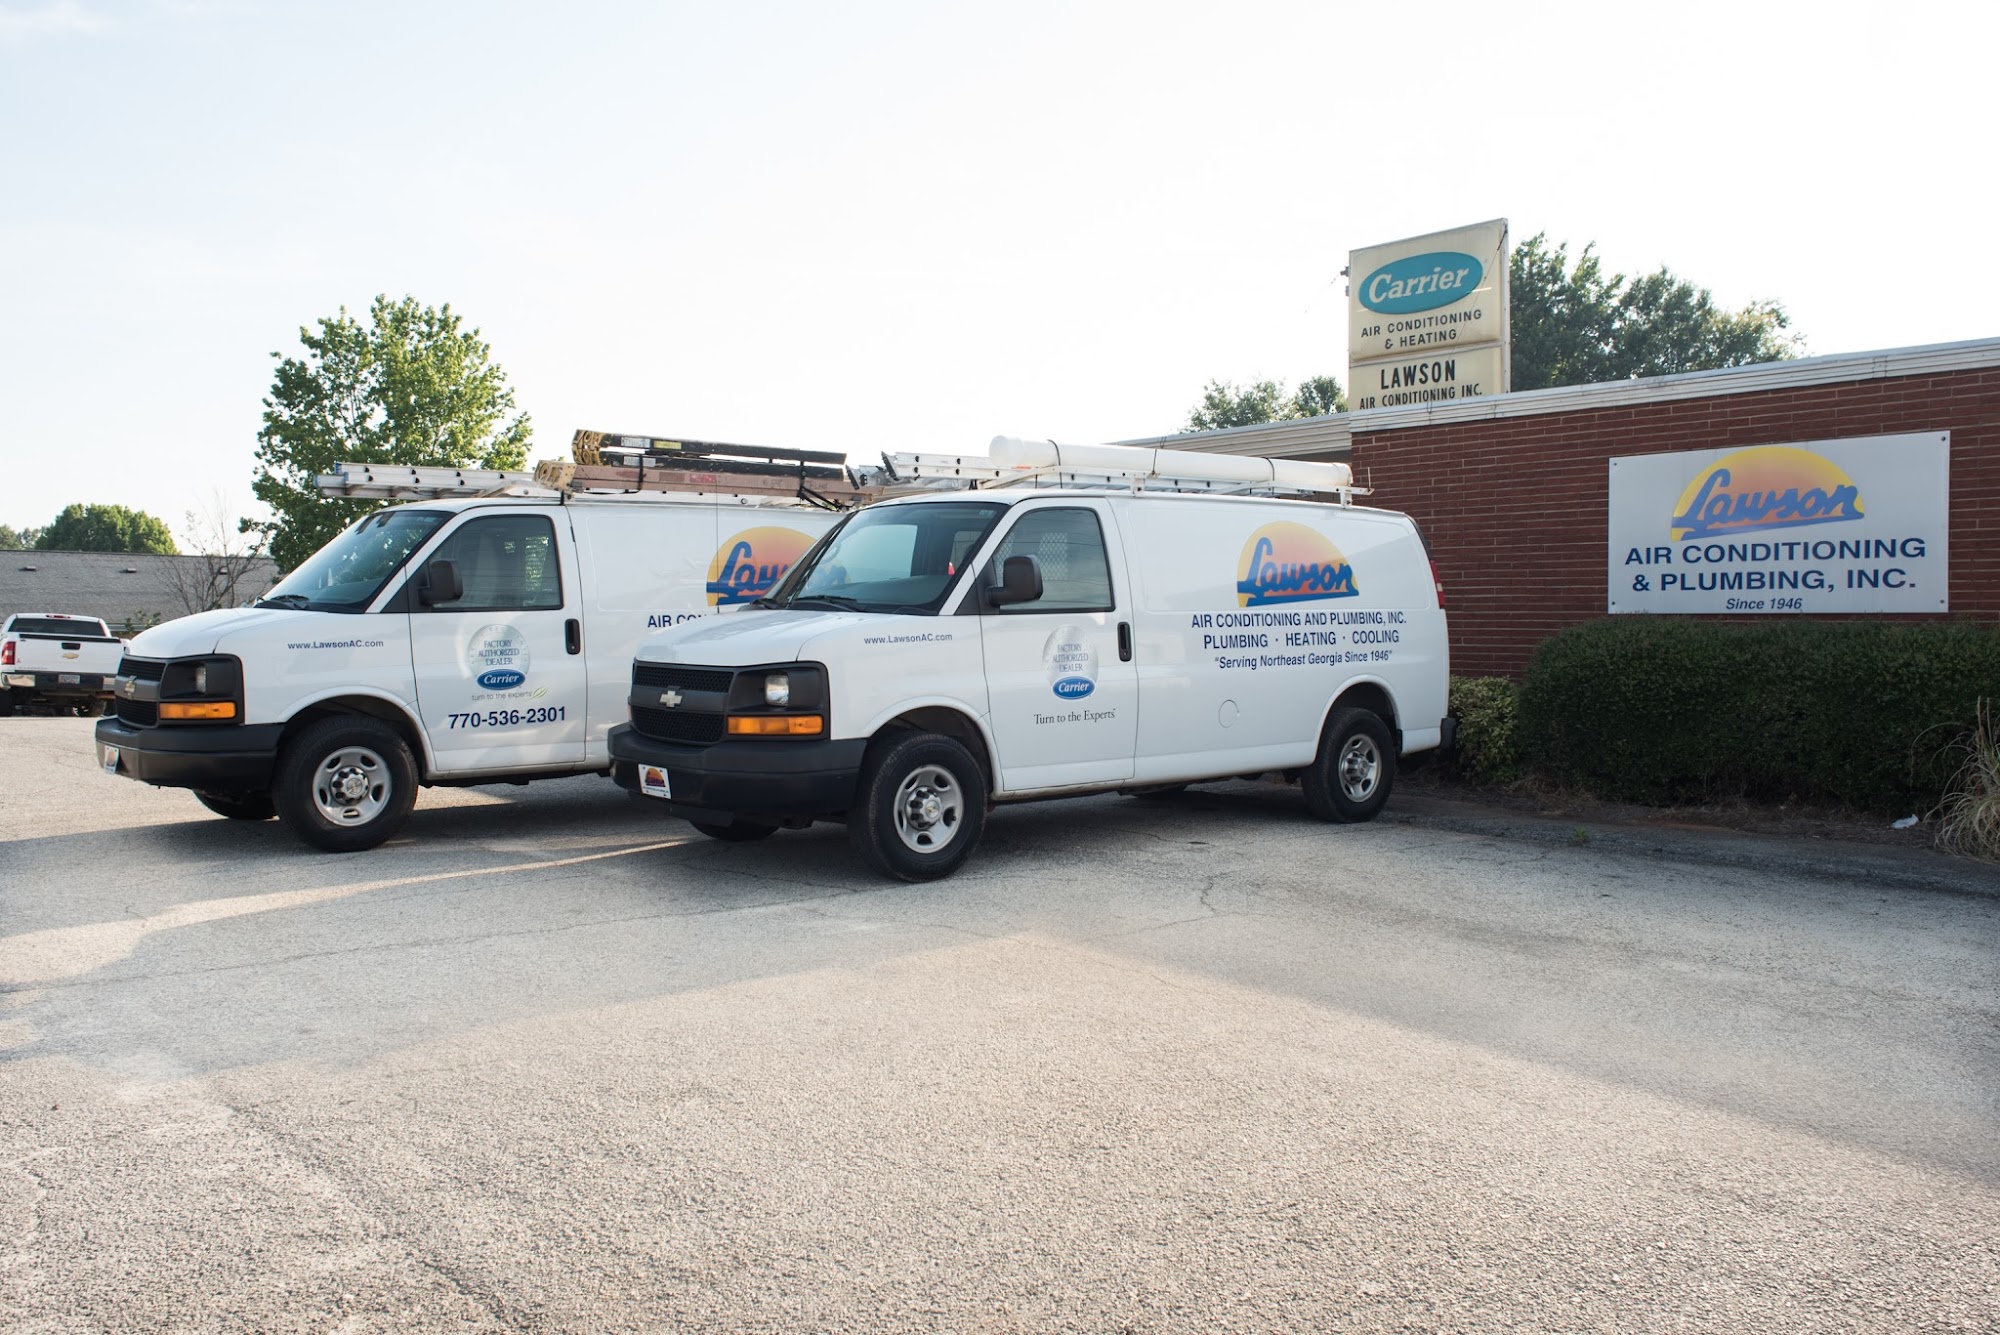 Lawson Air Conditioning and Plumbing, Inc.